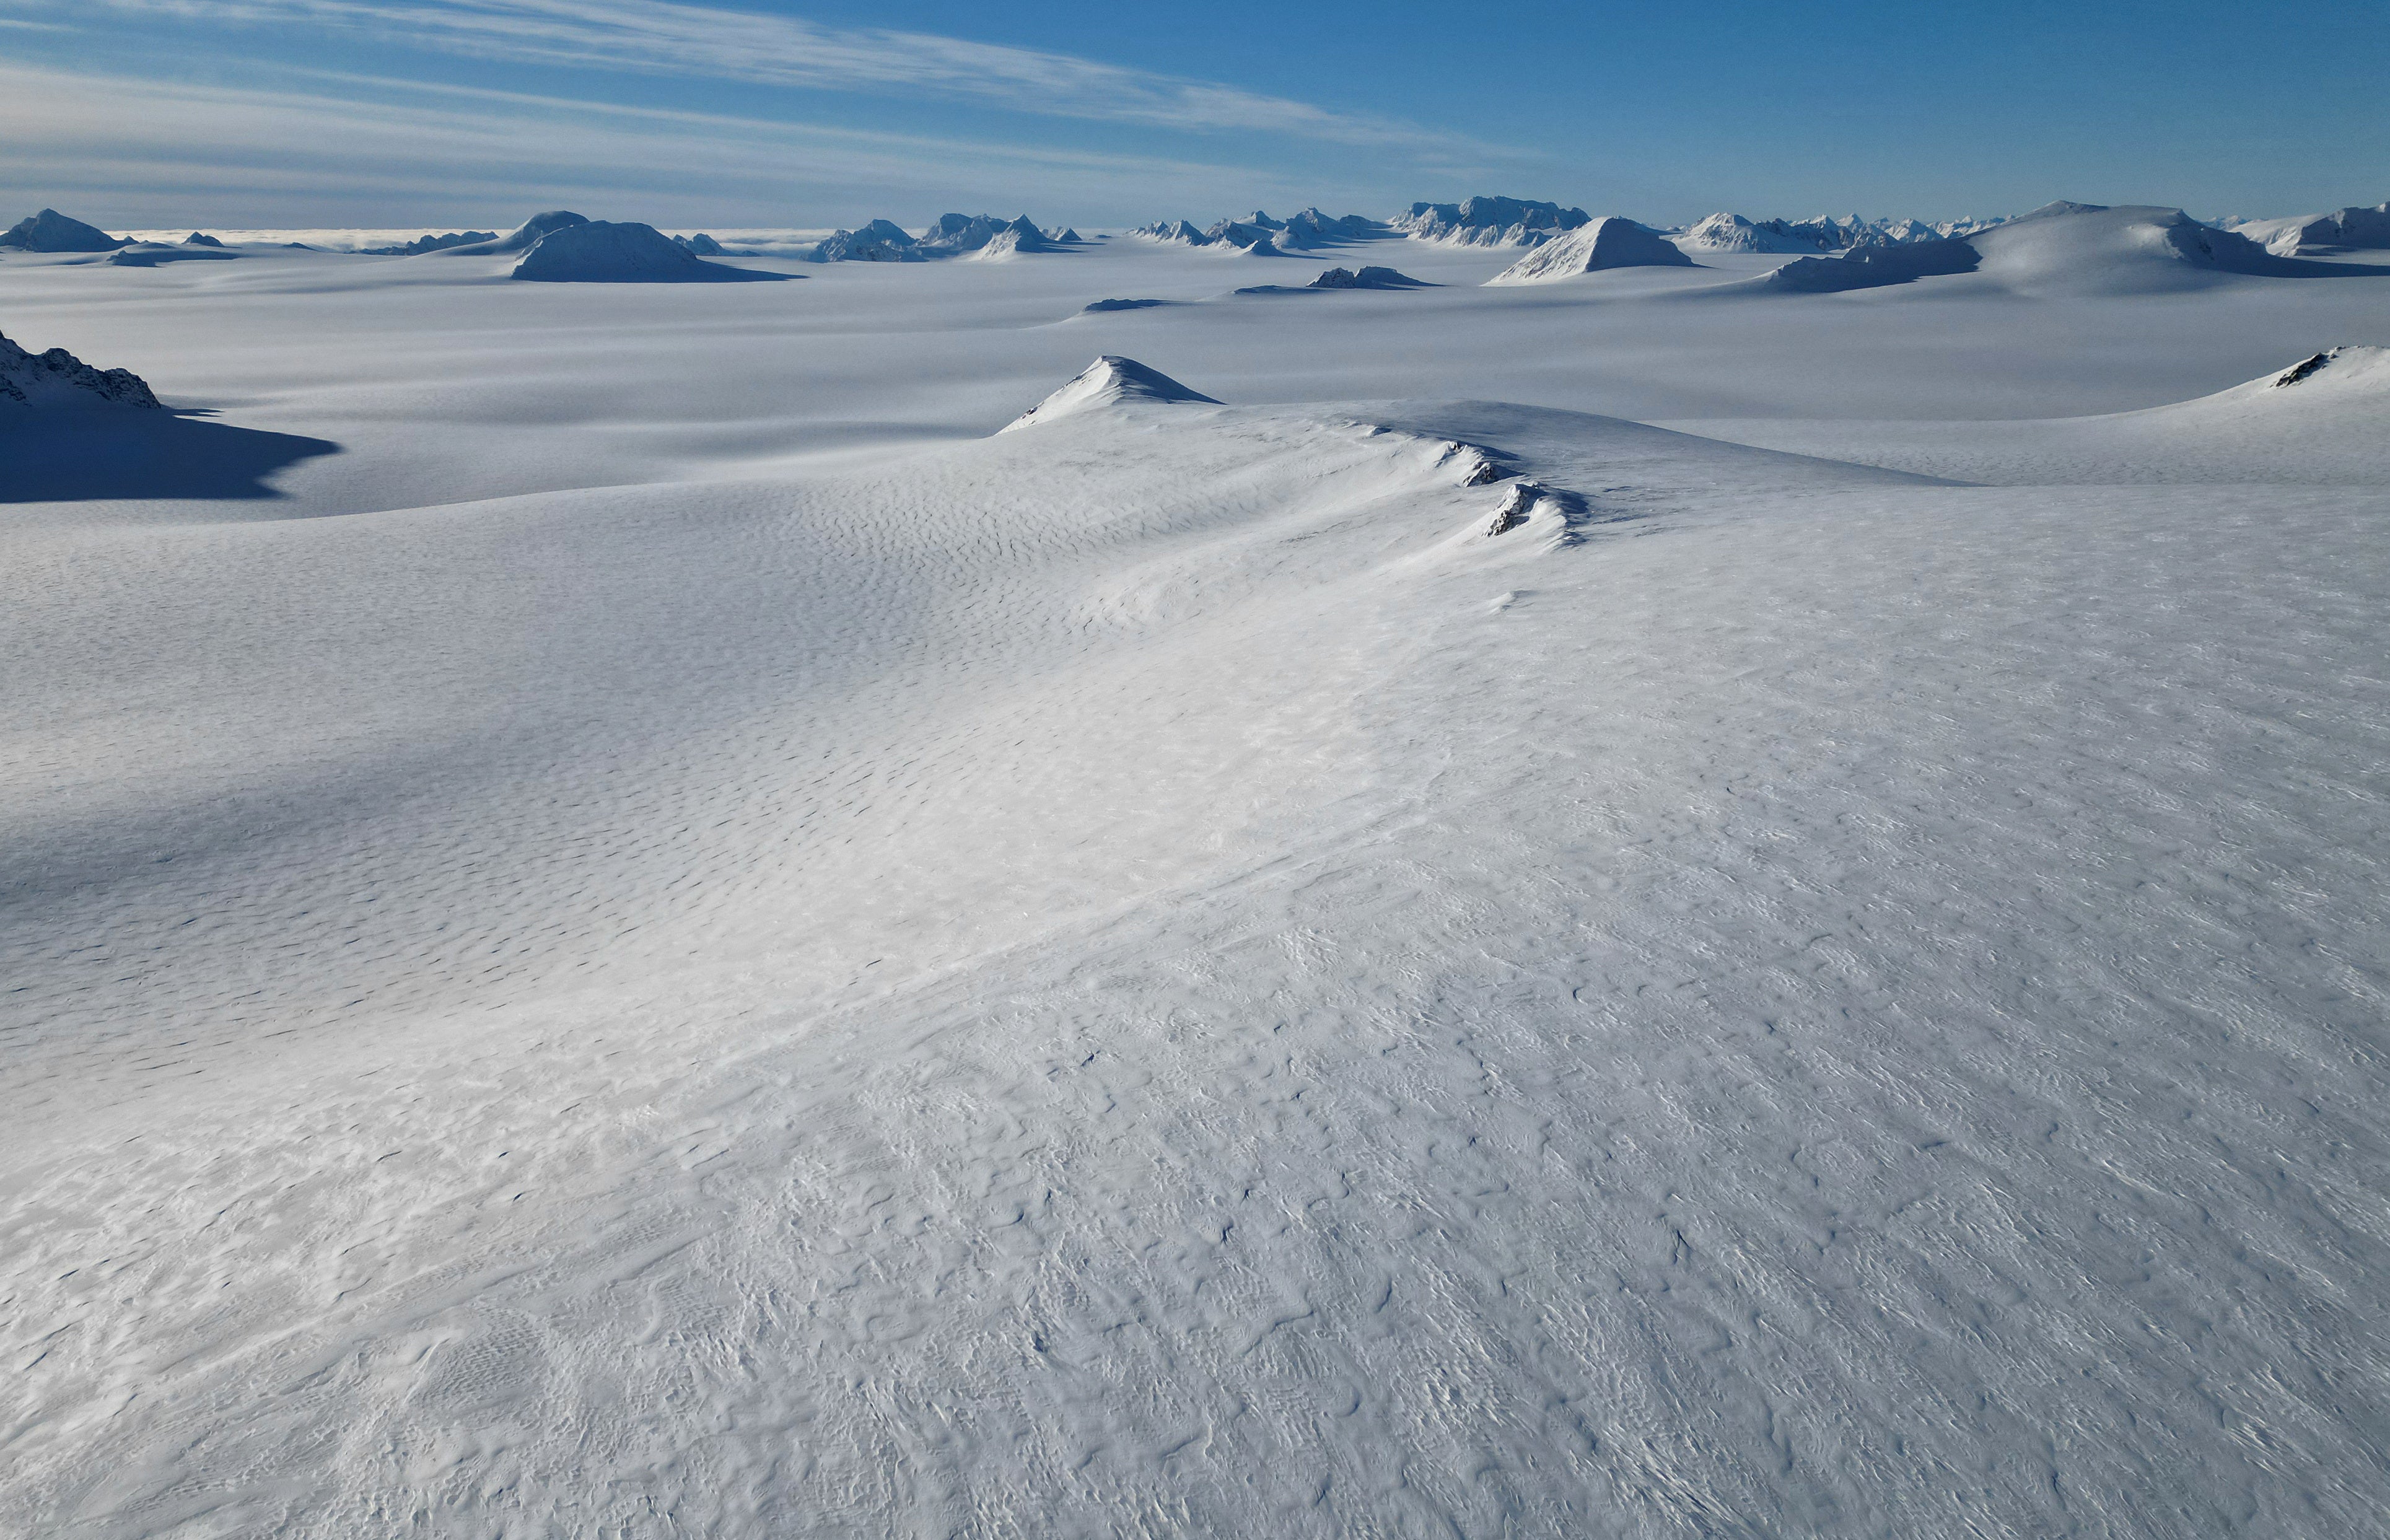 The Holtedahlfonna icefield is seen at 1,100 metres (3,600 feet) above sea level